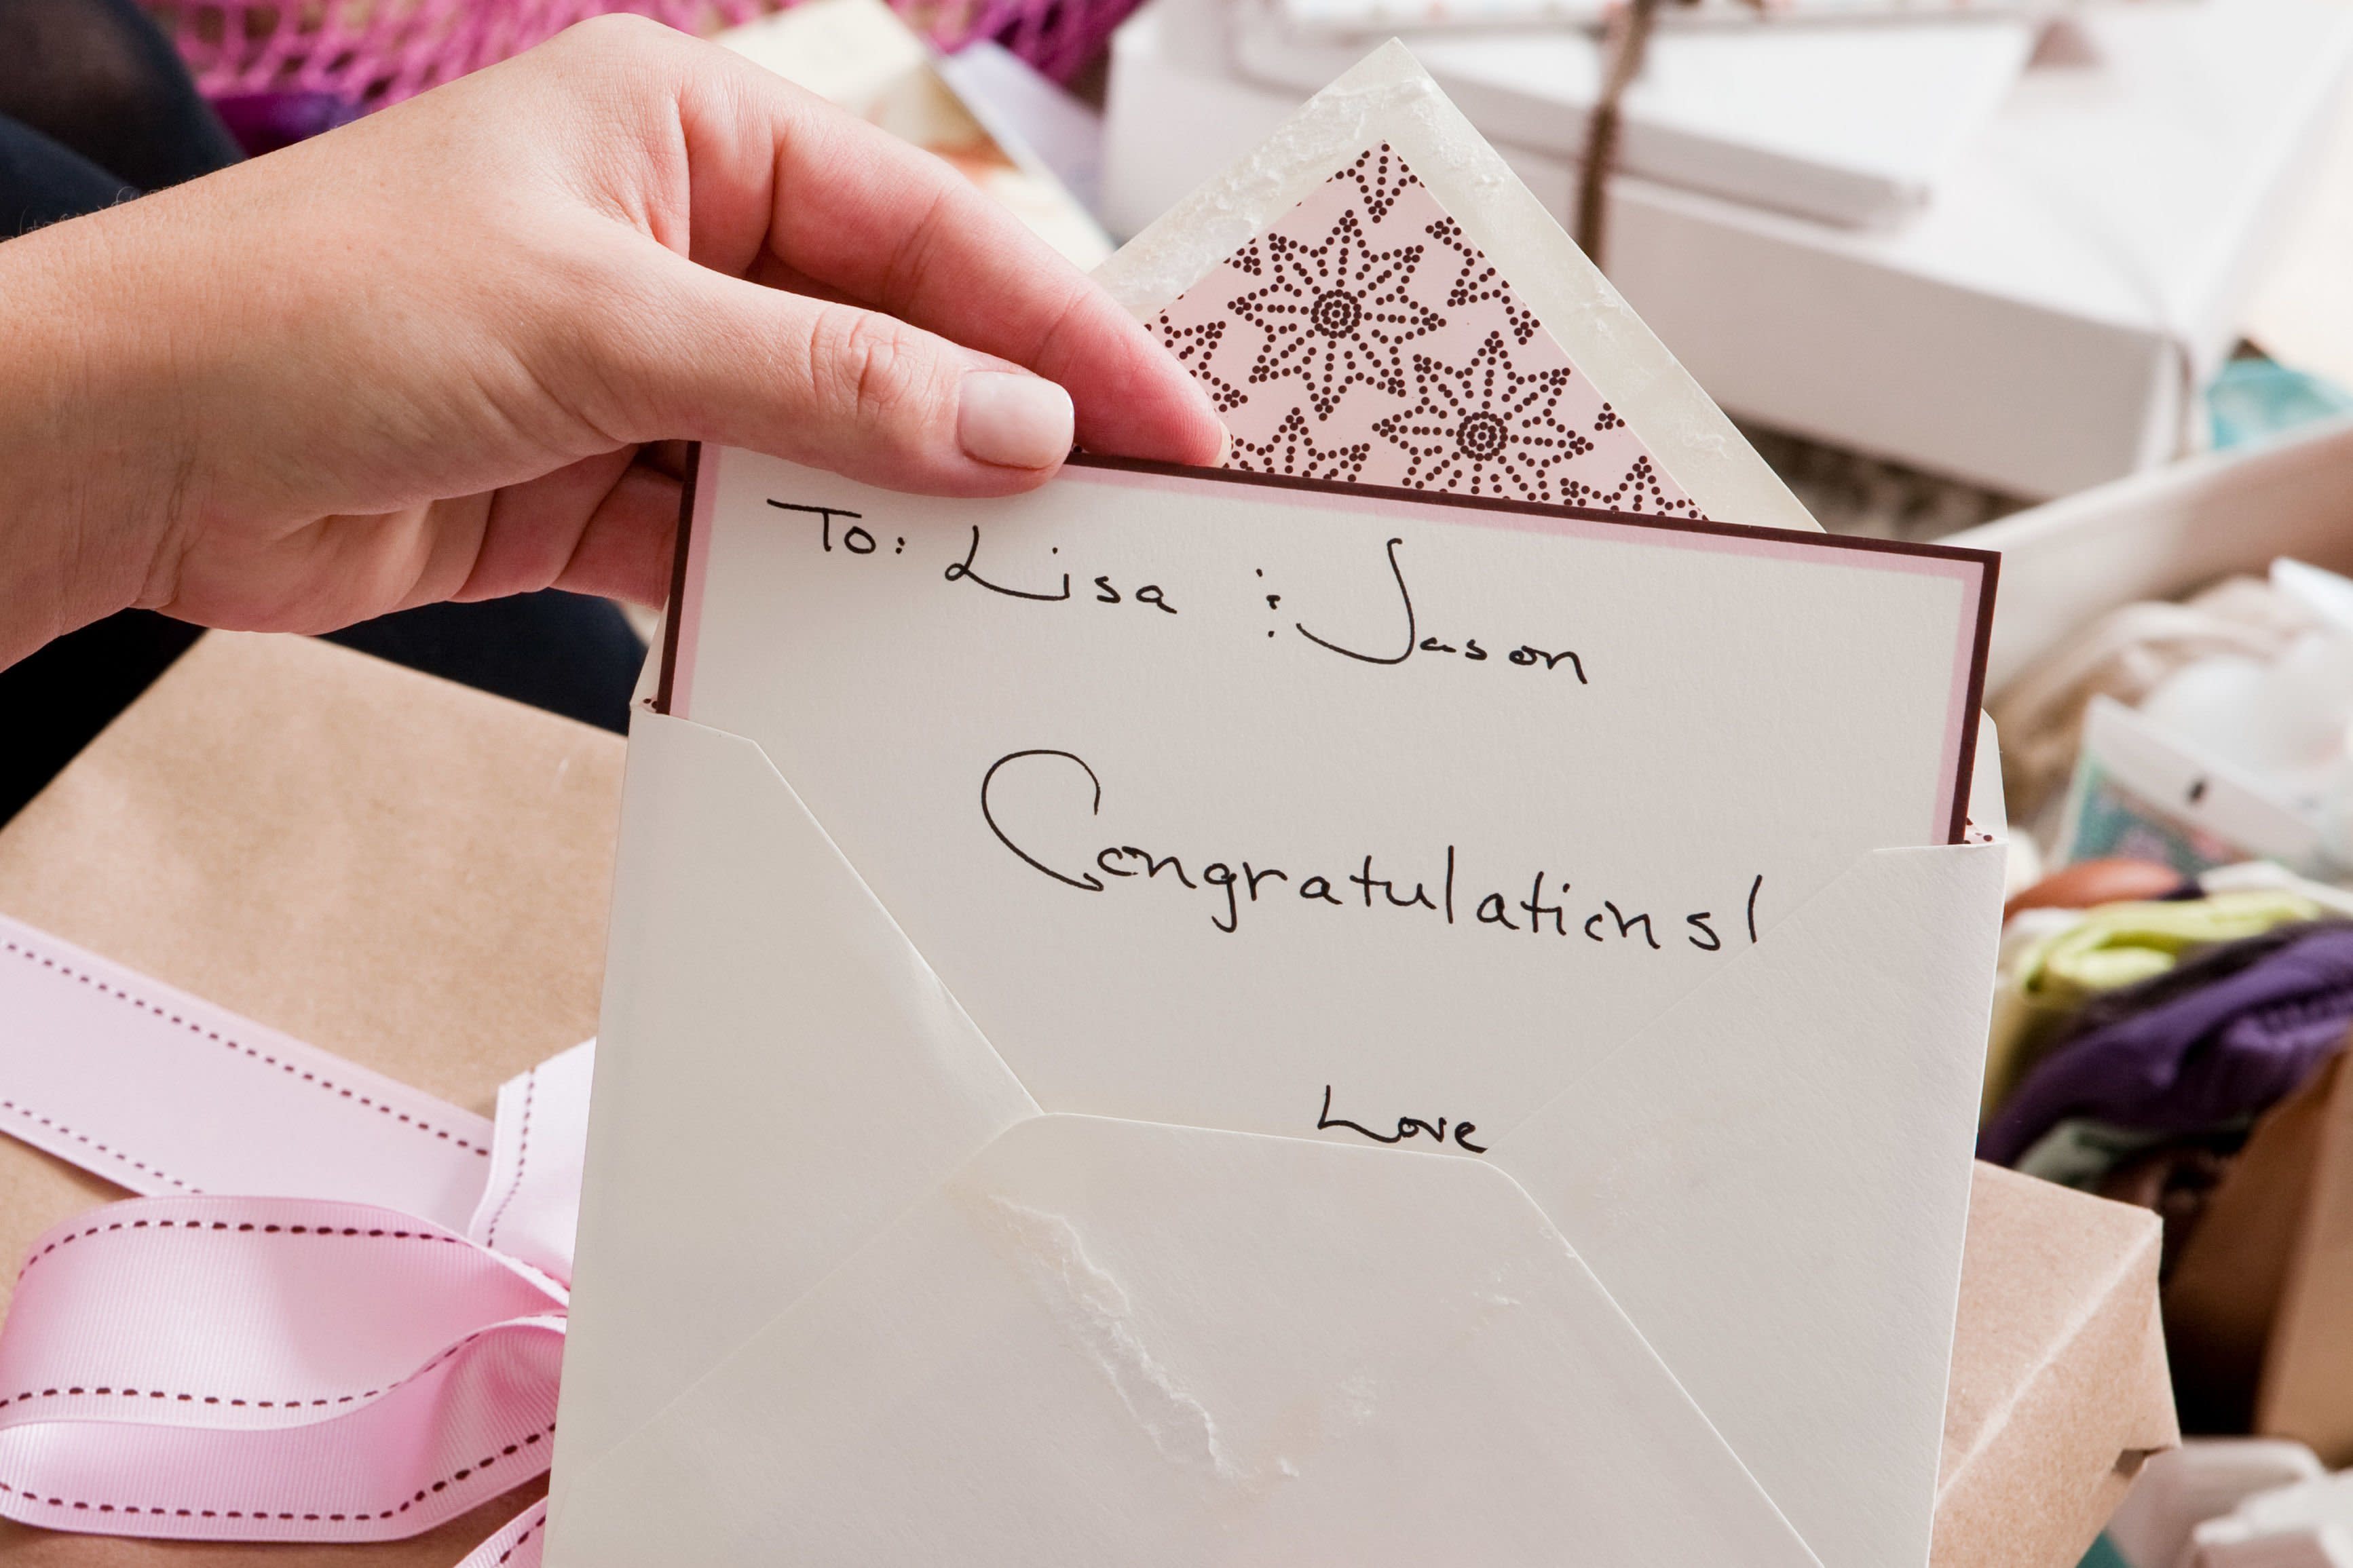 What To Write In A Wedding Card To My Niece - BEST HOME DESIGN IDEAS